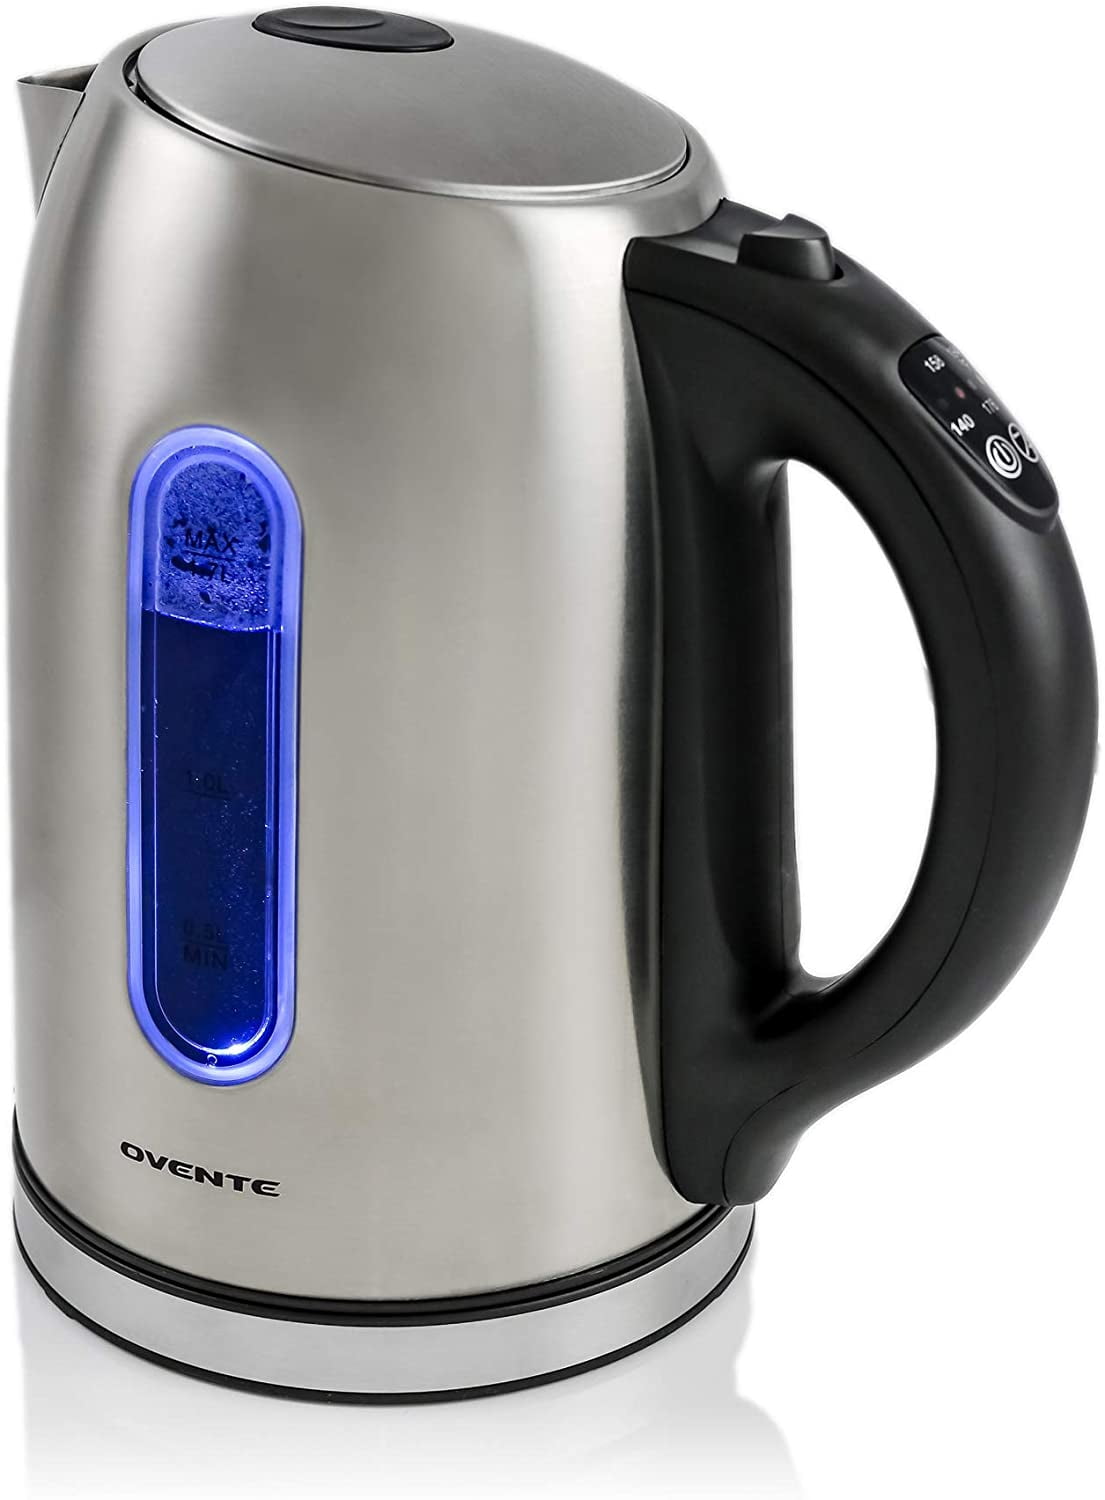 OVENTE Electric Stainless Steel Hot Water Kettle 1.7 Liter with 5 Temperature  Control & Concealed Heating Element, BPA-Free 1100 Watt Tea Maker with Auto  Shut-off and Keep Warm Setting, Silver KS88S 